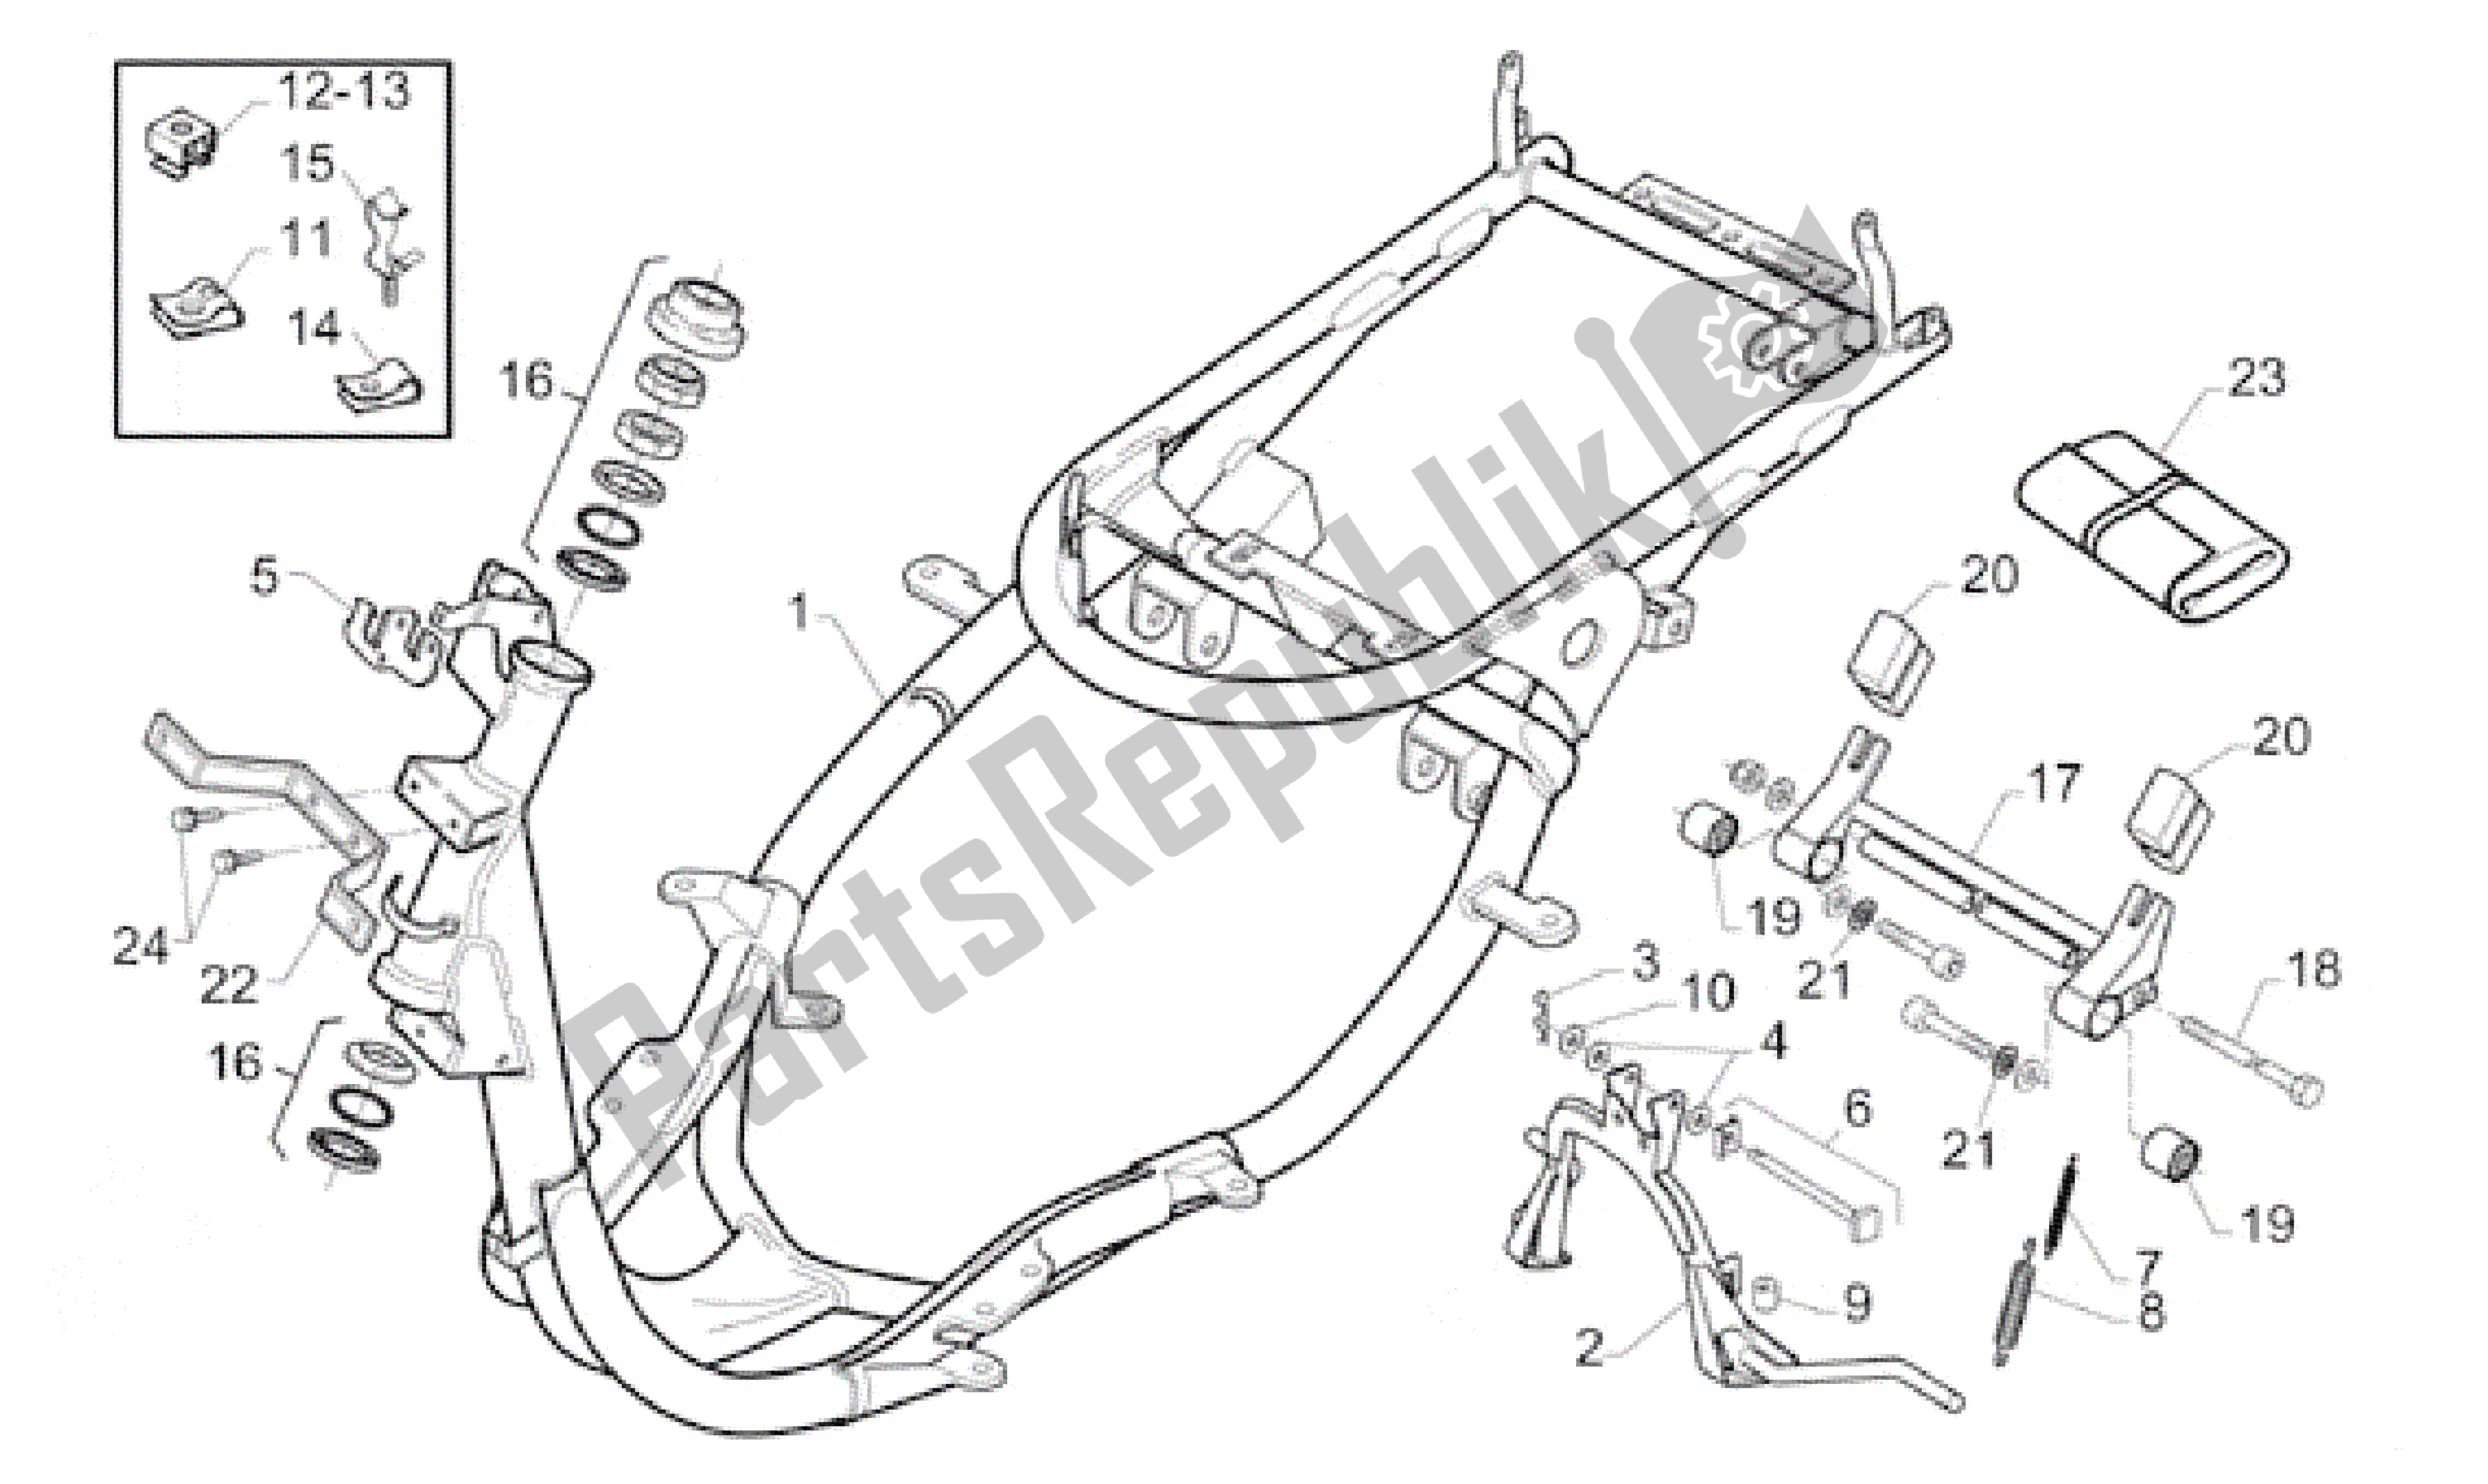 All parts for the Frame of the Aprilia Gulliver 50 1996 - 1998